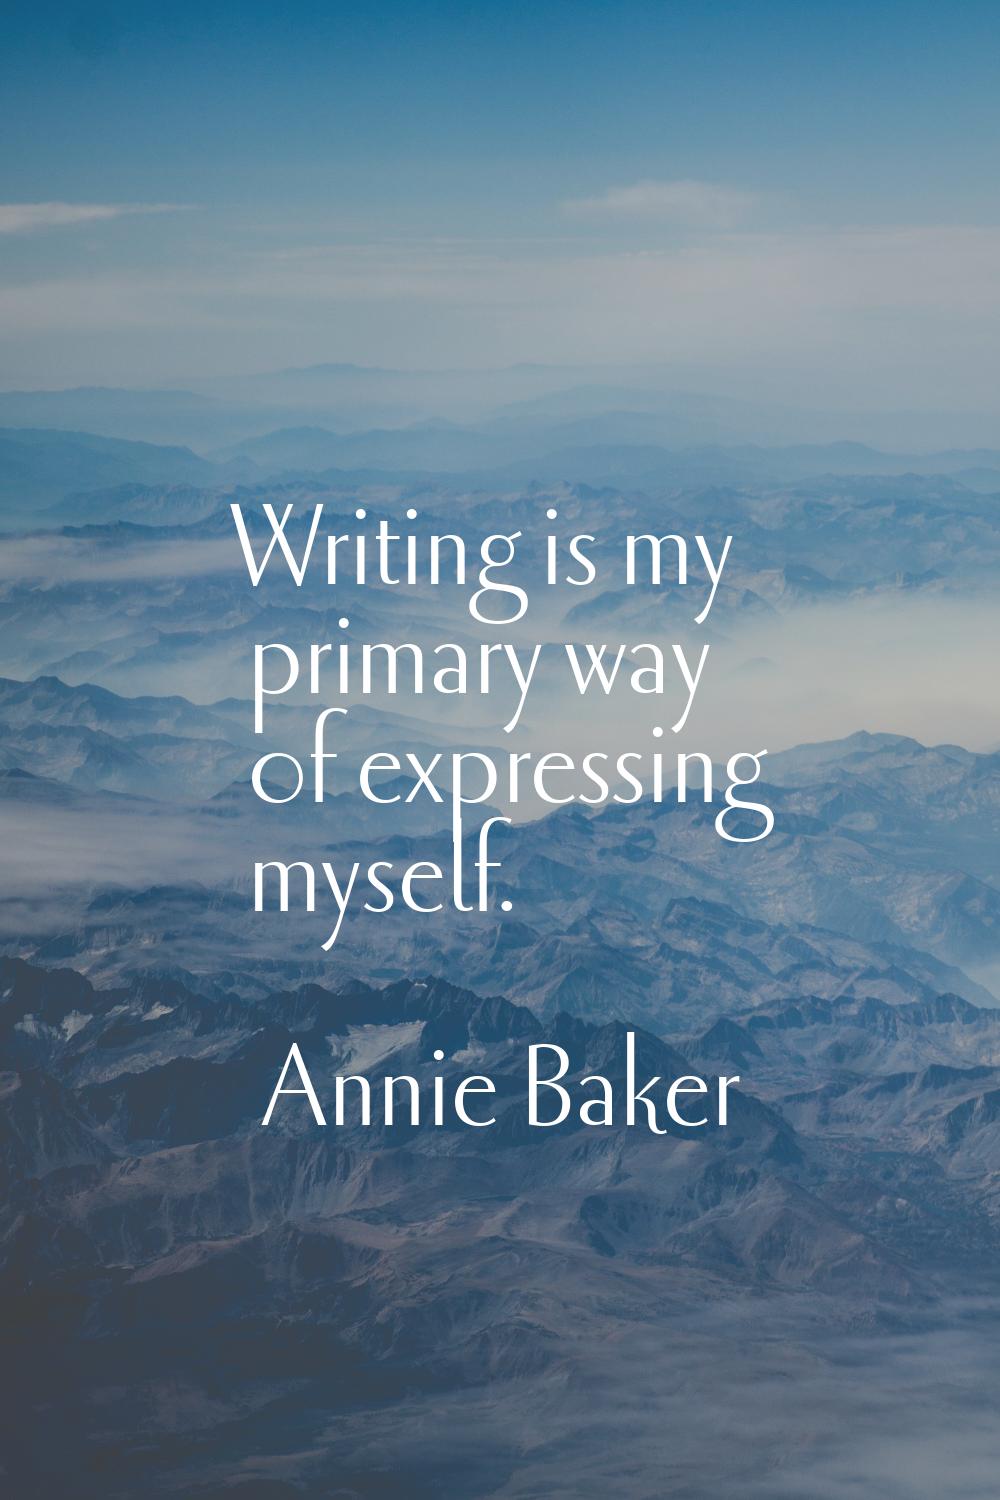 Writing is my primary way of expressing myself.